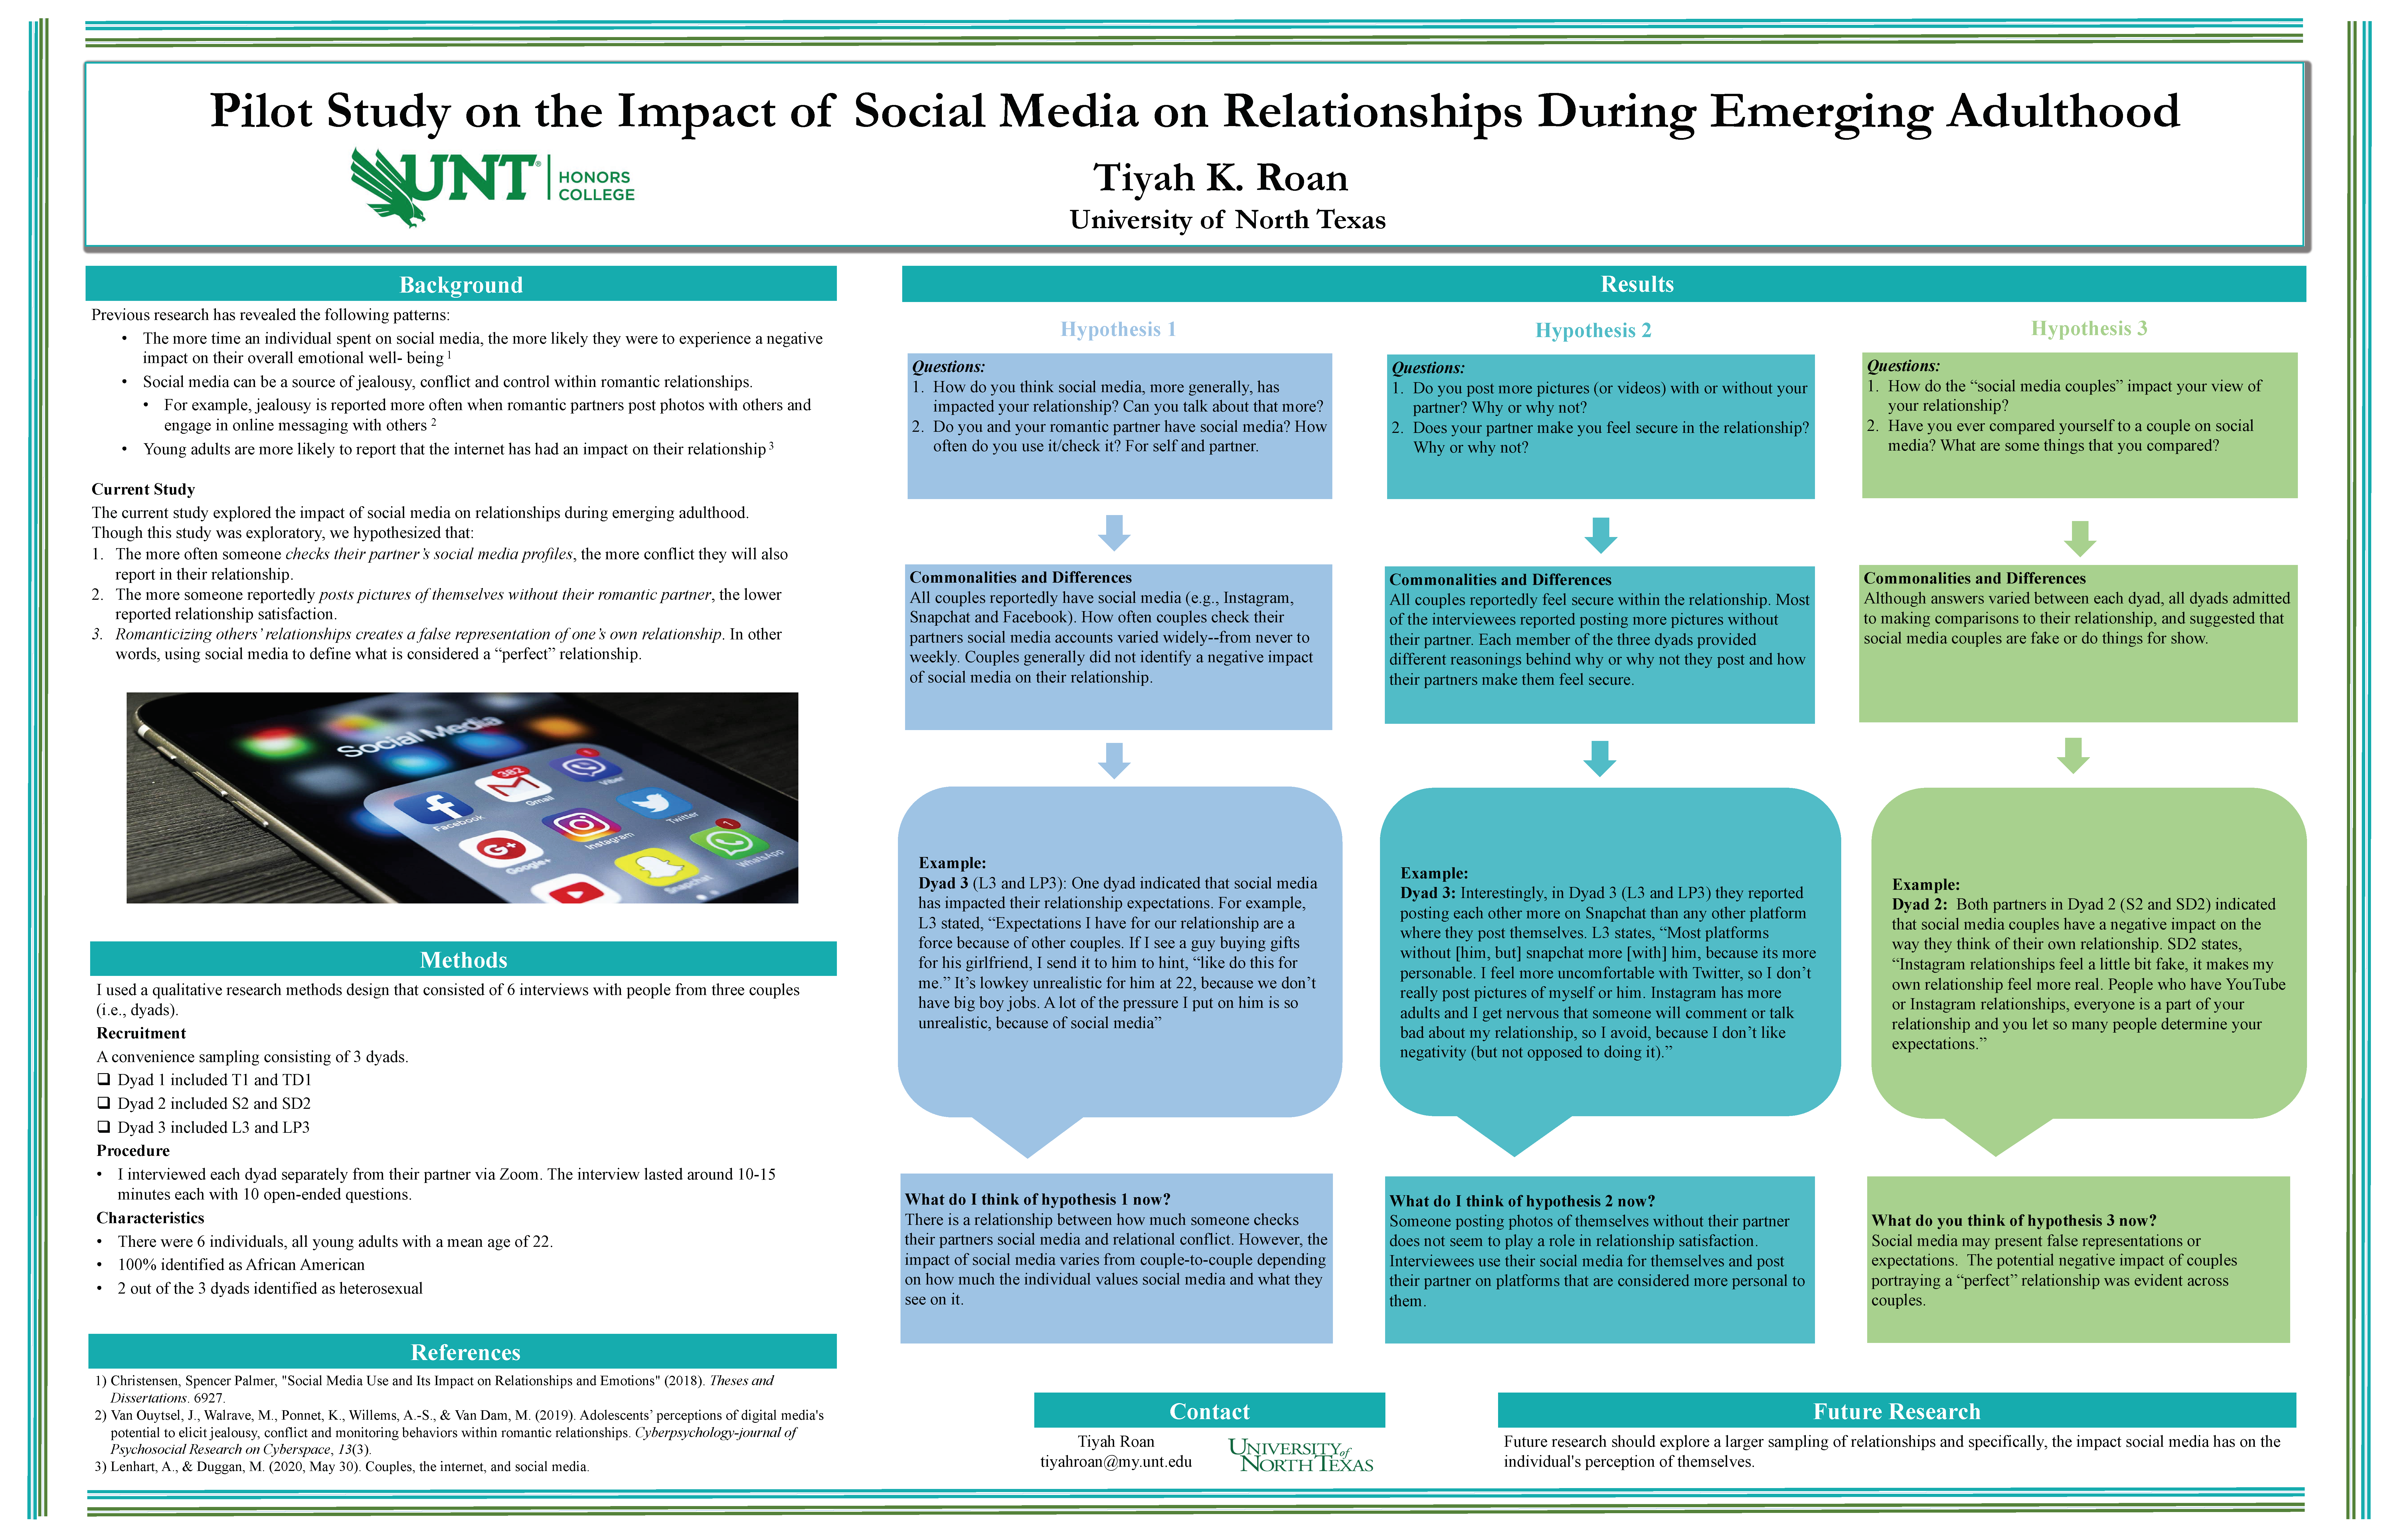 Pilot Study on the Impact of Social Media on Relationships During Emerging Adulthood